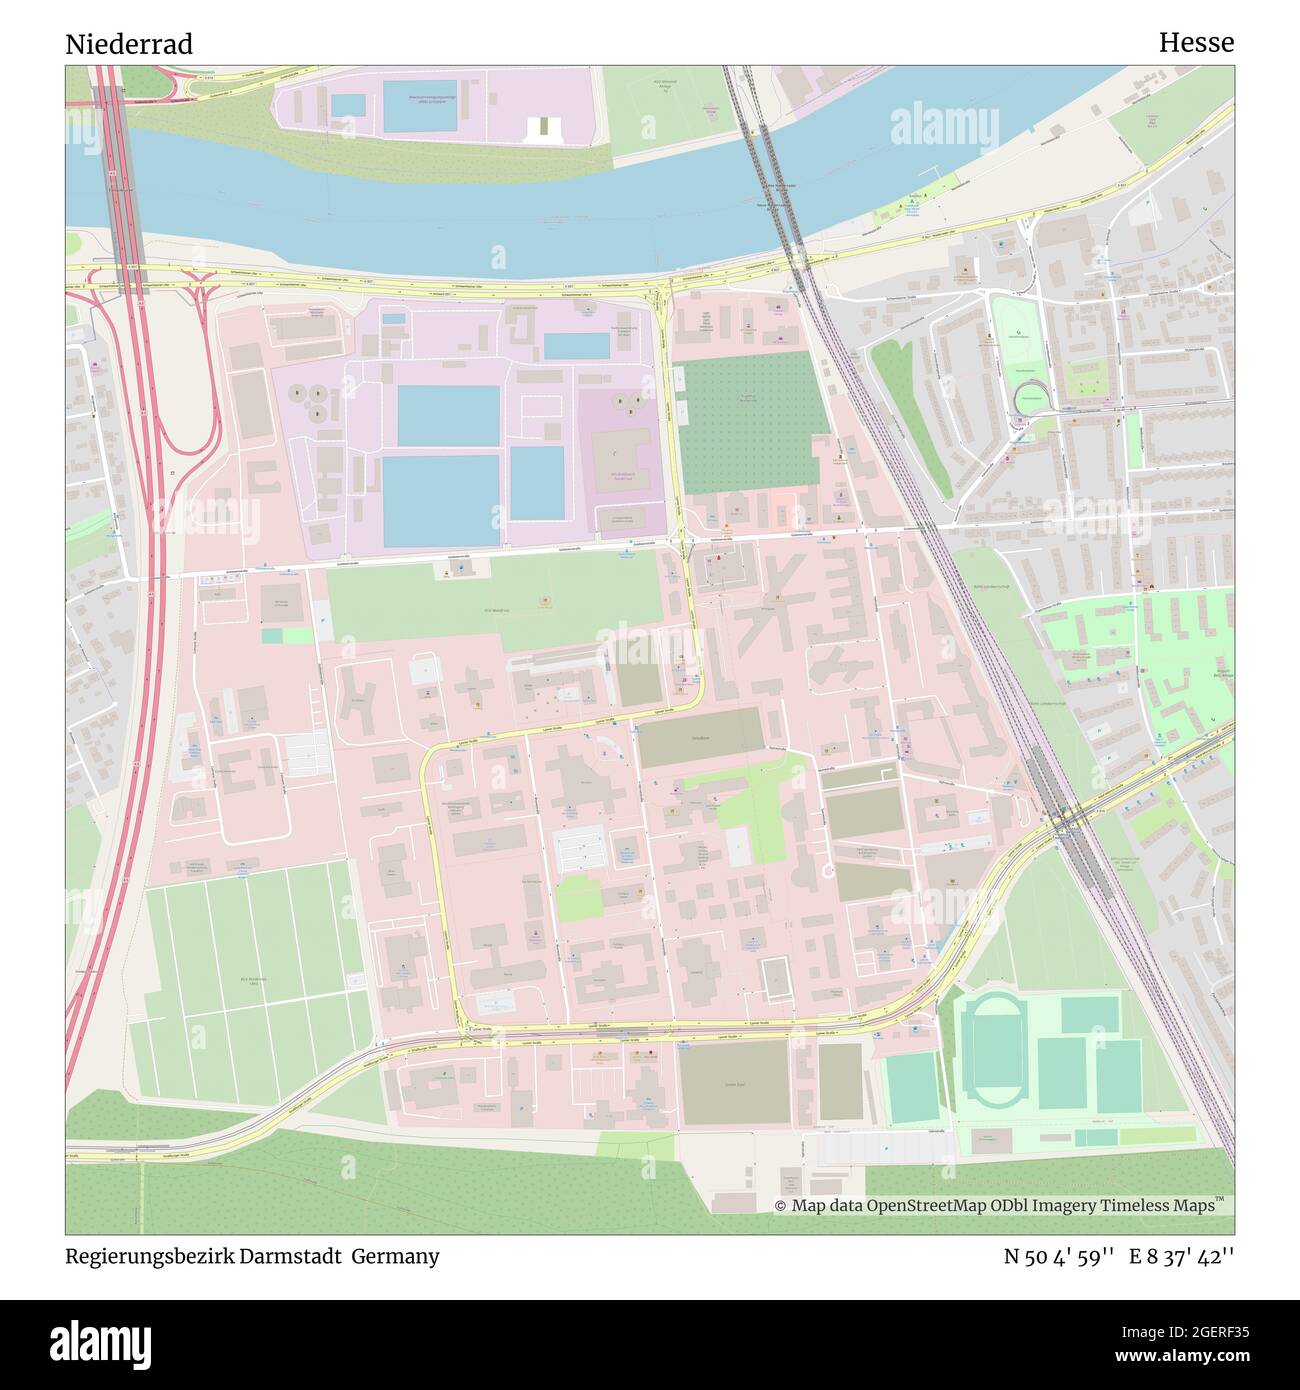 Niederrad, Regierungsbezirk Darmstadt, Germany, Hesse, N 50 4' 59'', E 8 37' 42'', map, Timeless Map published in 2021. Travelers, explorers and adventurers like Florence Nightingale, David Livingstone, Ernest Shackleton, Lewis and Clark and Sherlock Holmes relied on maps to plan travels to the world's most remote corners, Timeless Maps is mapping most locations on the globe, showing the achievement of great dreams Stock Photo